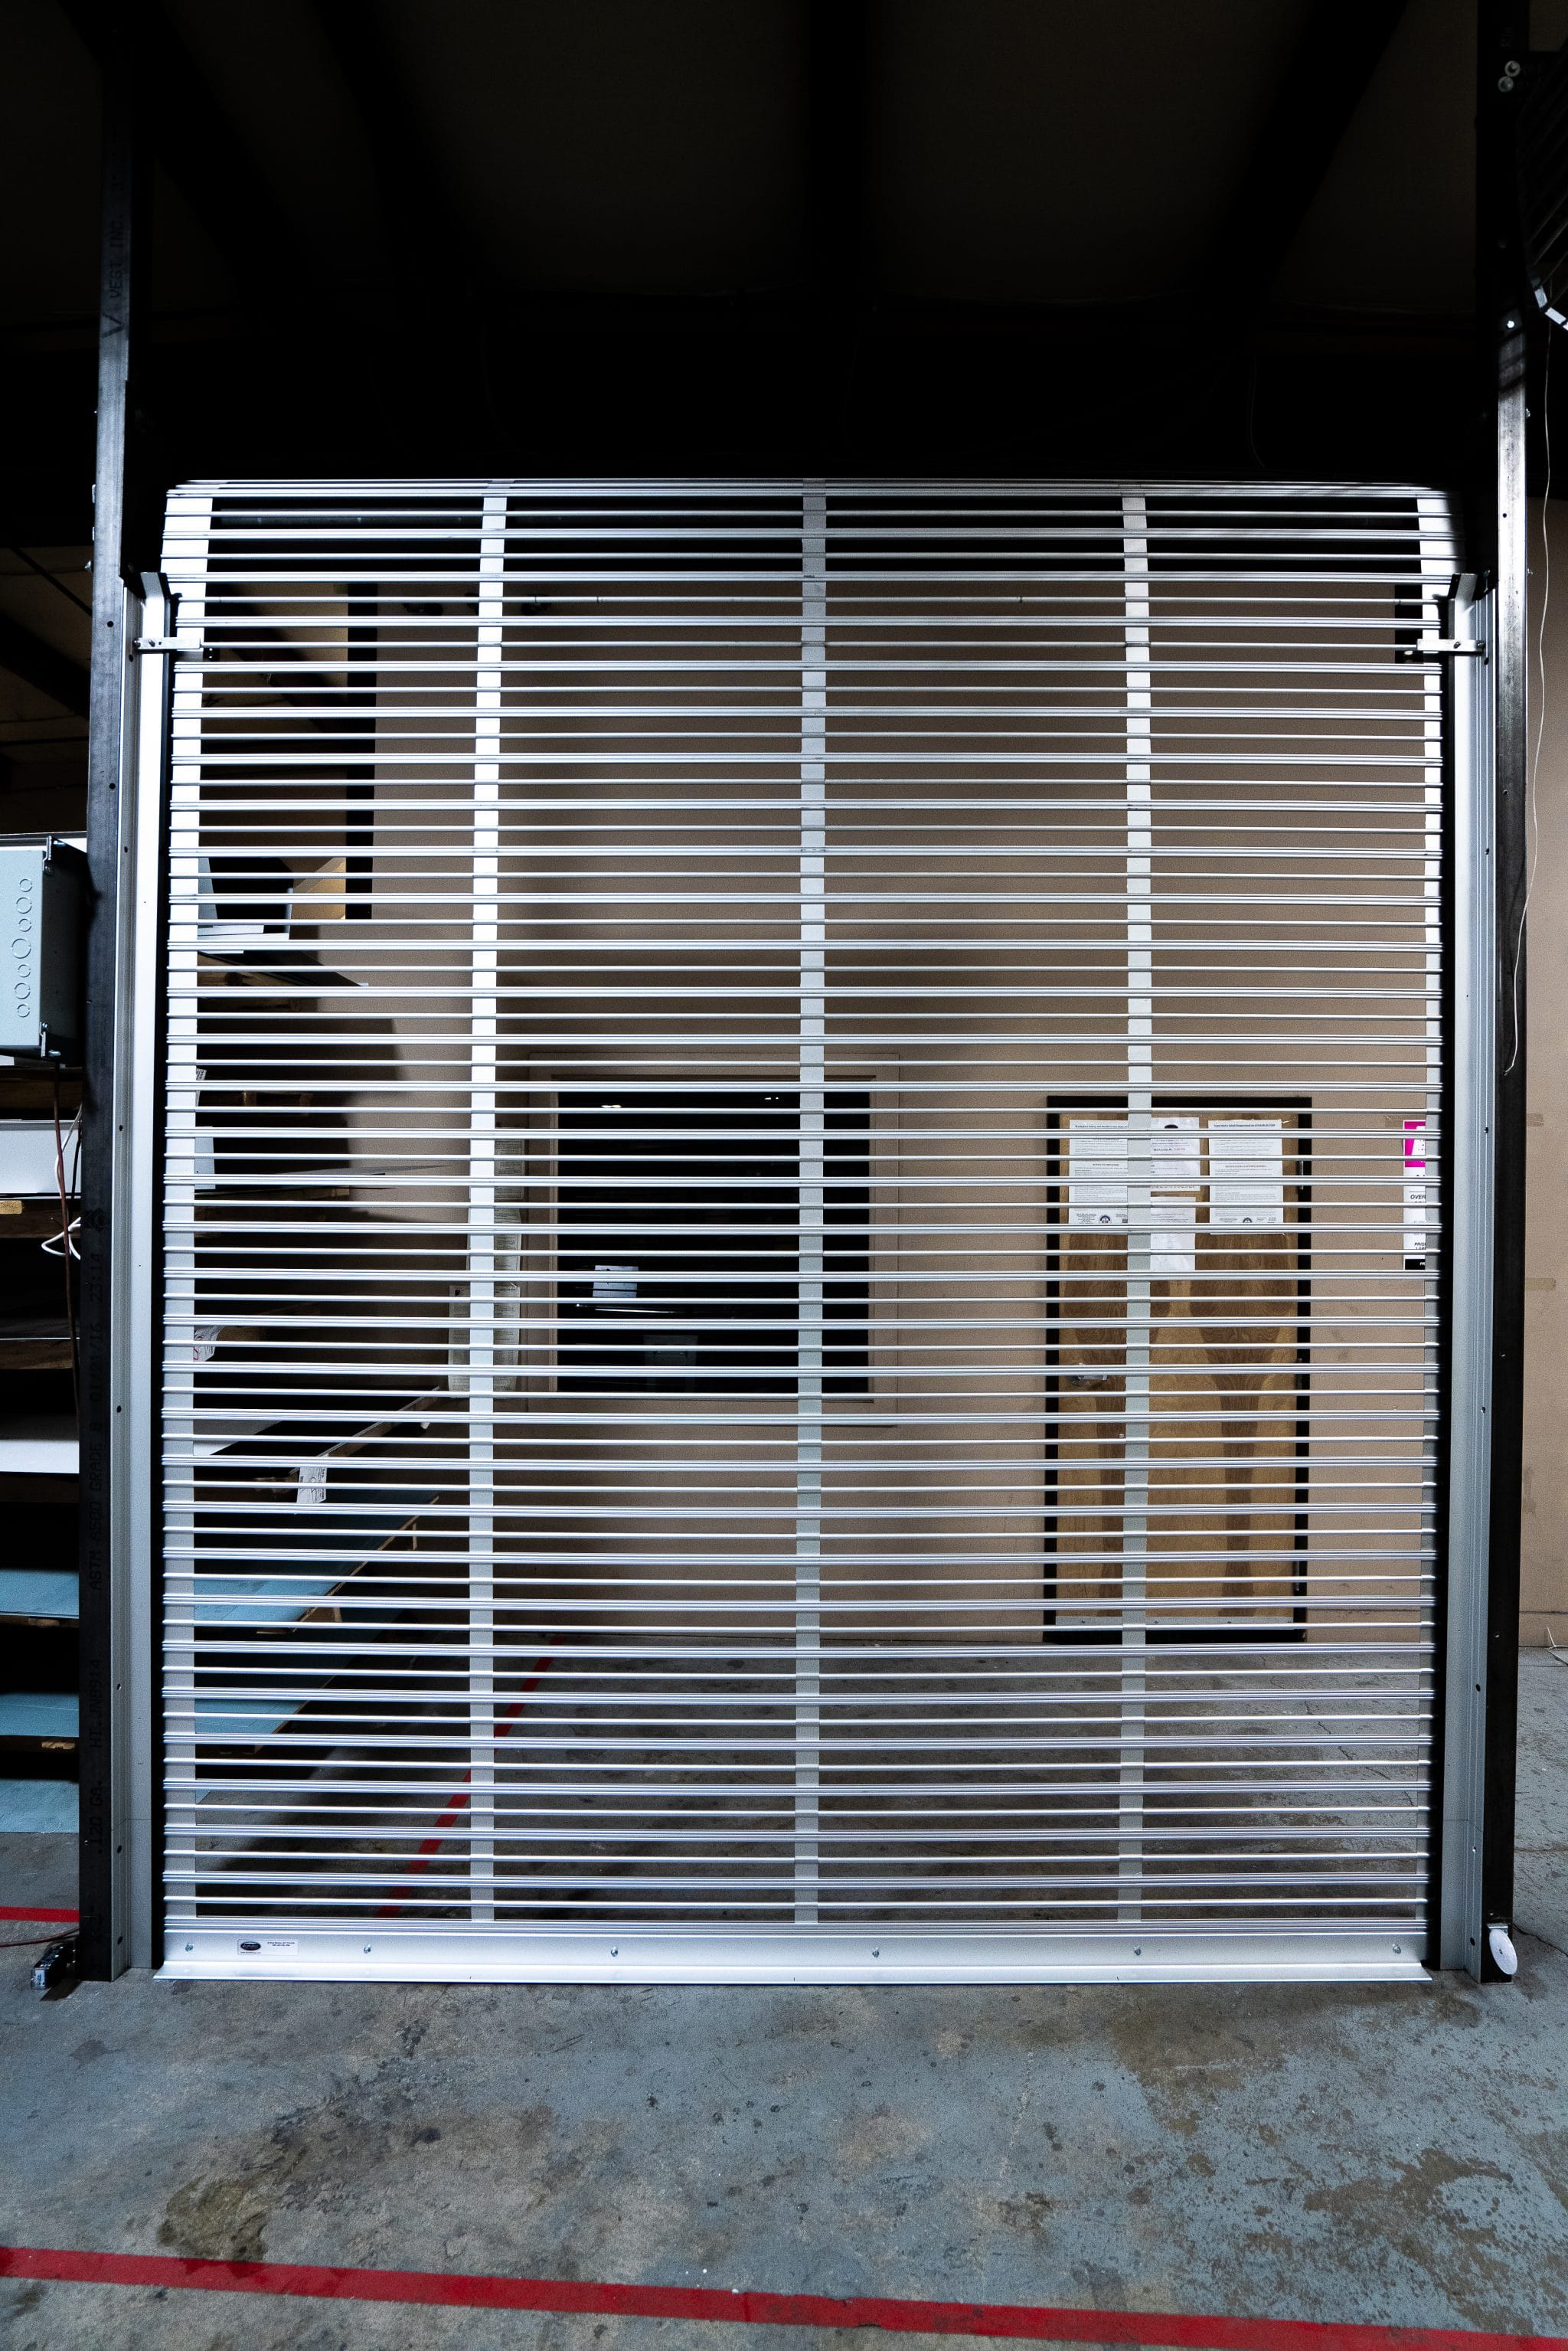 Commercial Security Grilles, Retractable Security Grilles Security For  Windows and Doorways